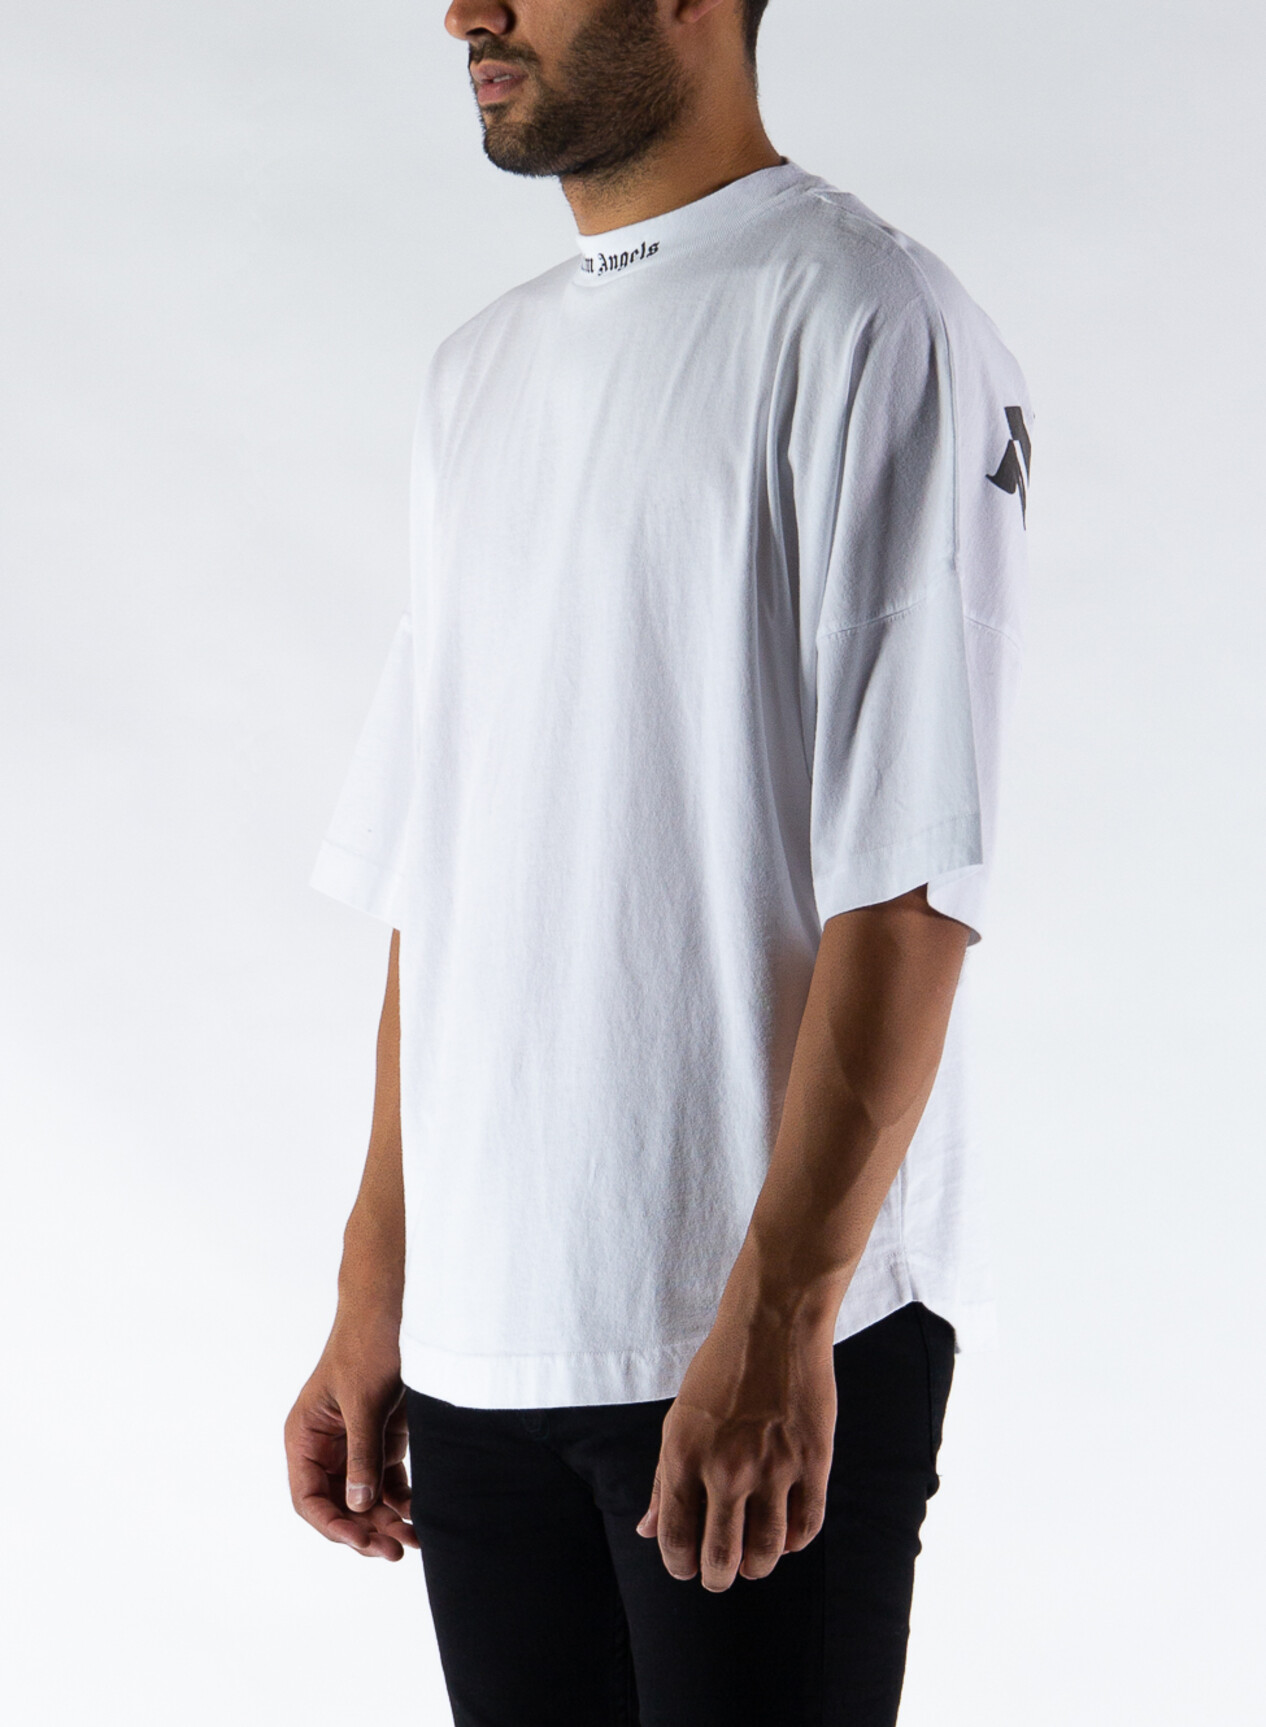 LOGO OVER T-SHIRT in white - Palm Angels® Official